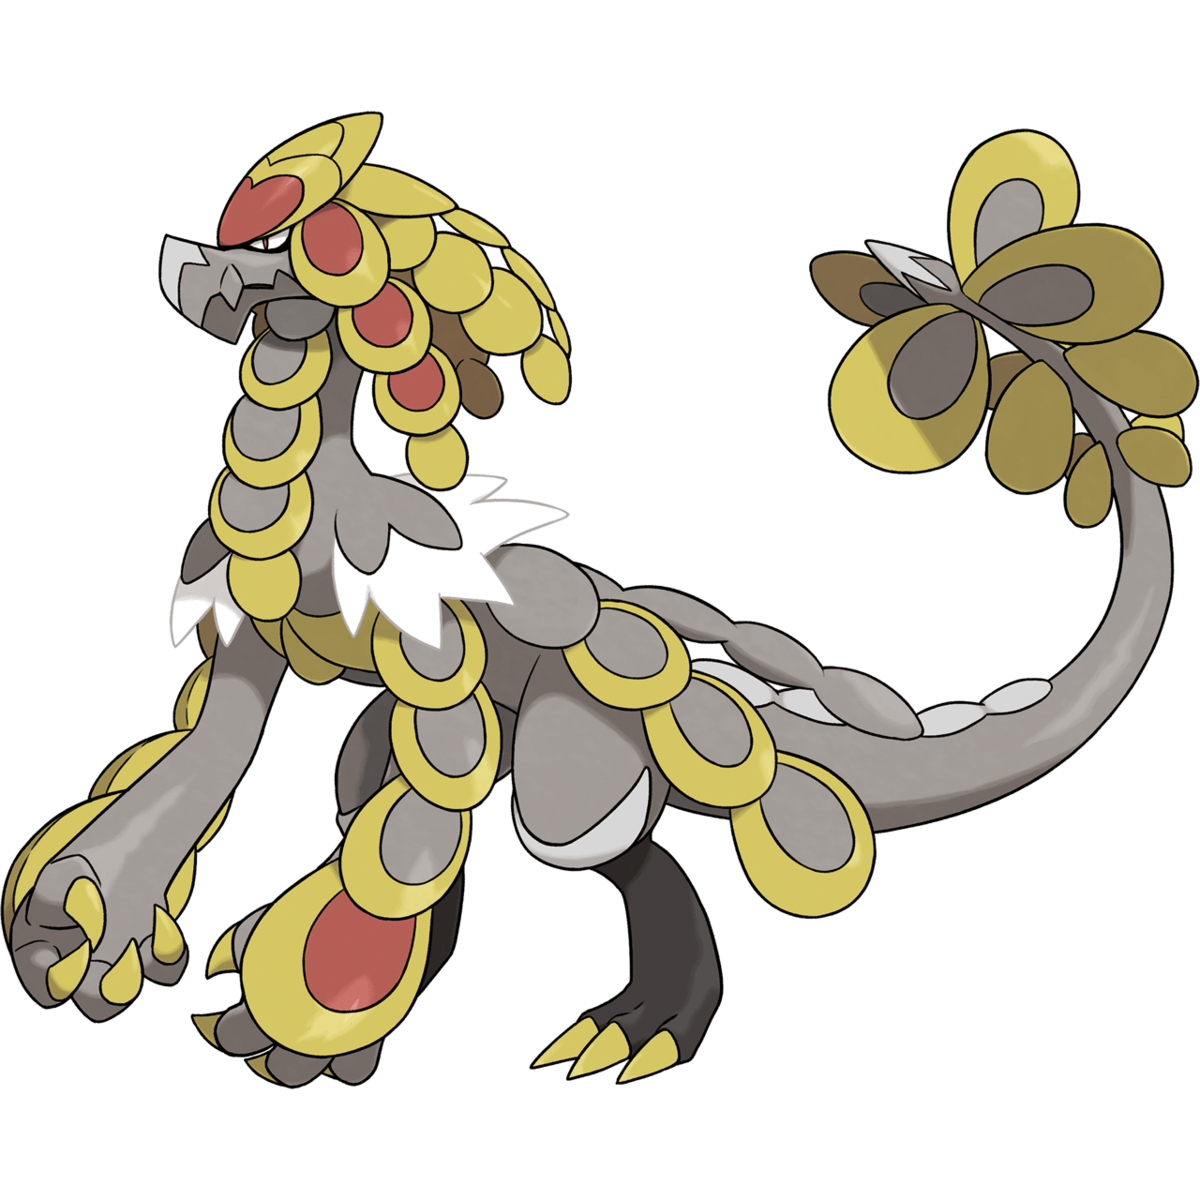 Why is there so much hate for Kommo-o?